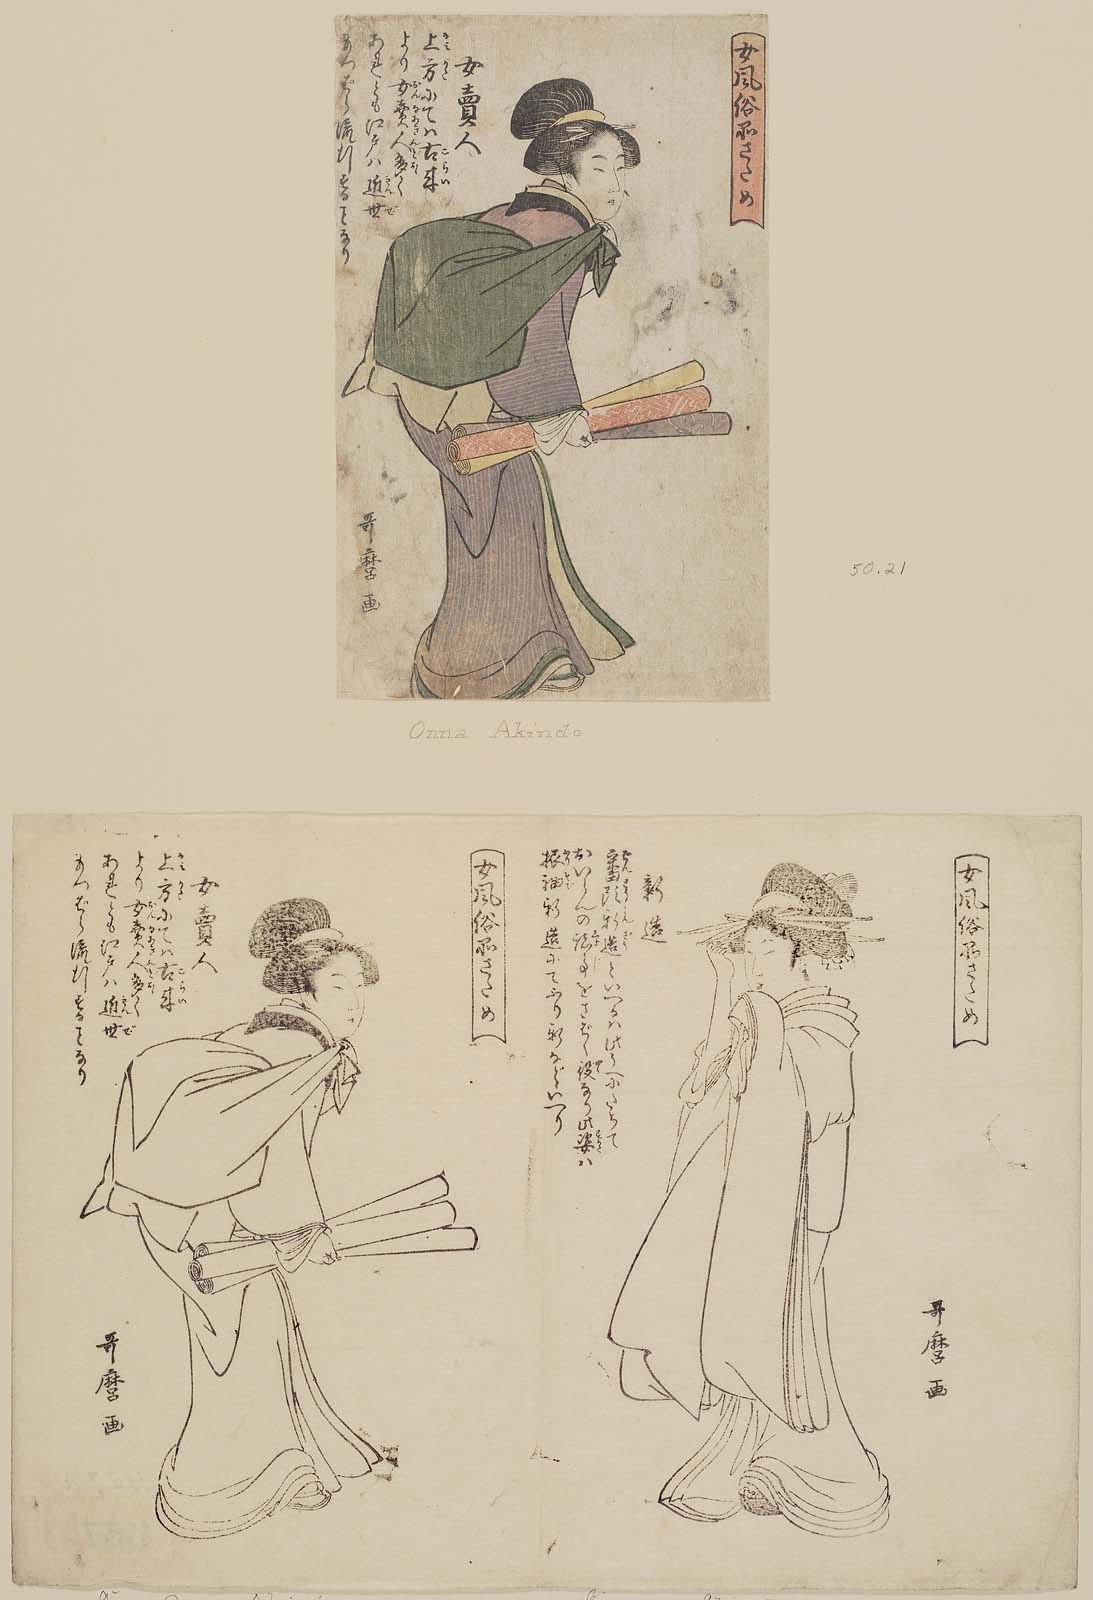 Female Peddler (Onna akindo), from the book Comparisons of the 